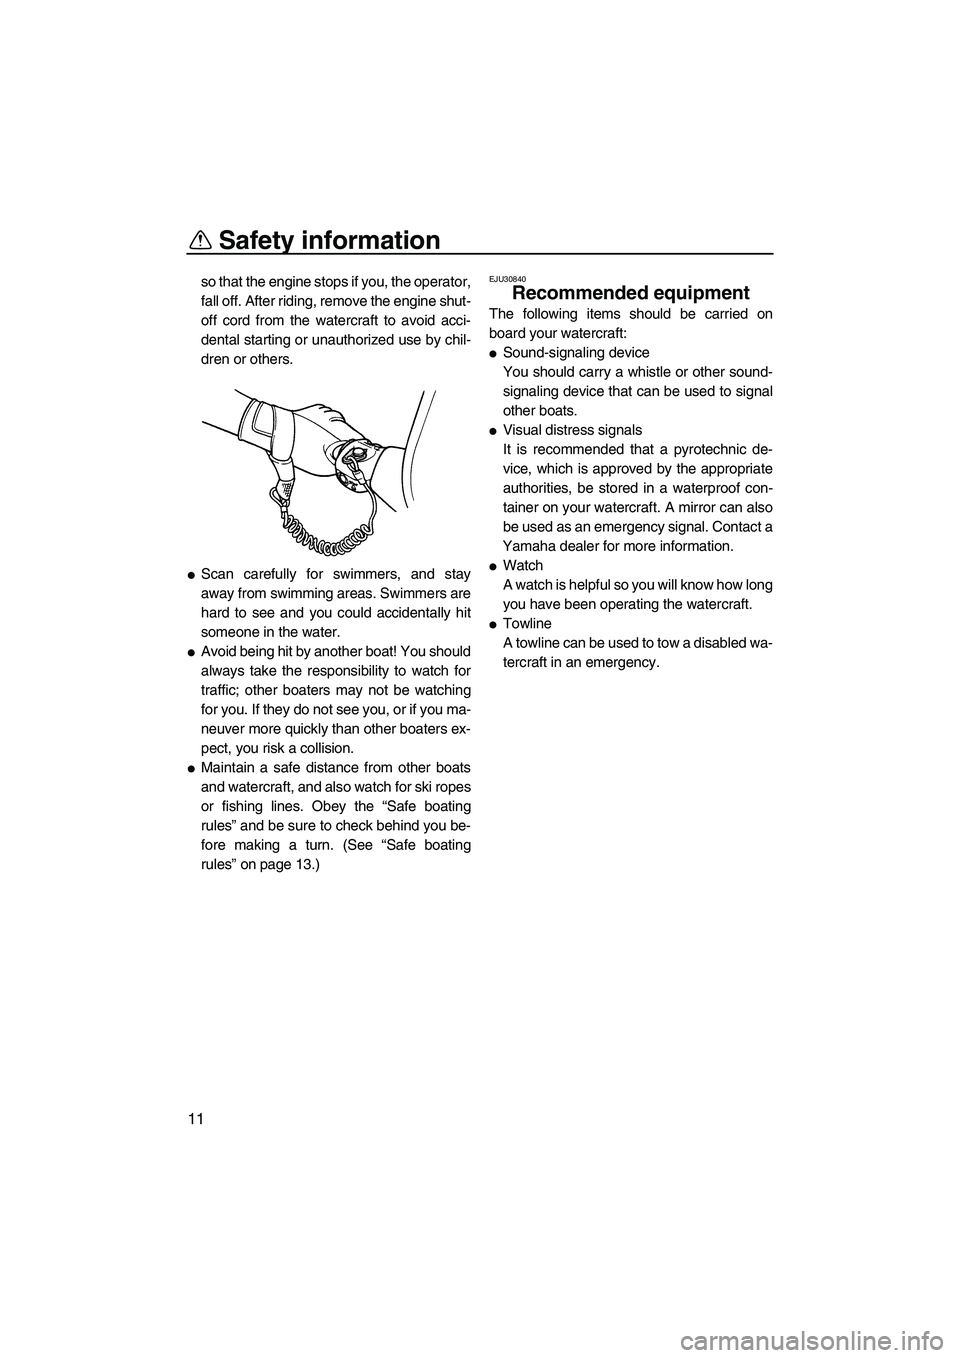 YAMAHA SUPERJET 2008 User Guide Safety information
11
so that the engine stops if you, the operator,
fall off. After riding, remove the engine shut-
off cord from the watercraft to avoid acci-
dental starting or unauthorized use by 